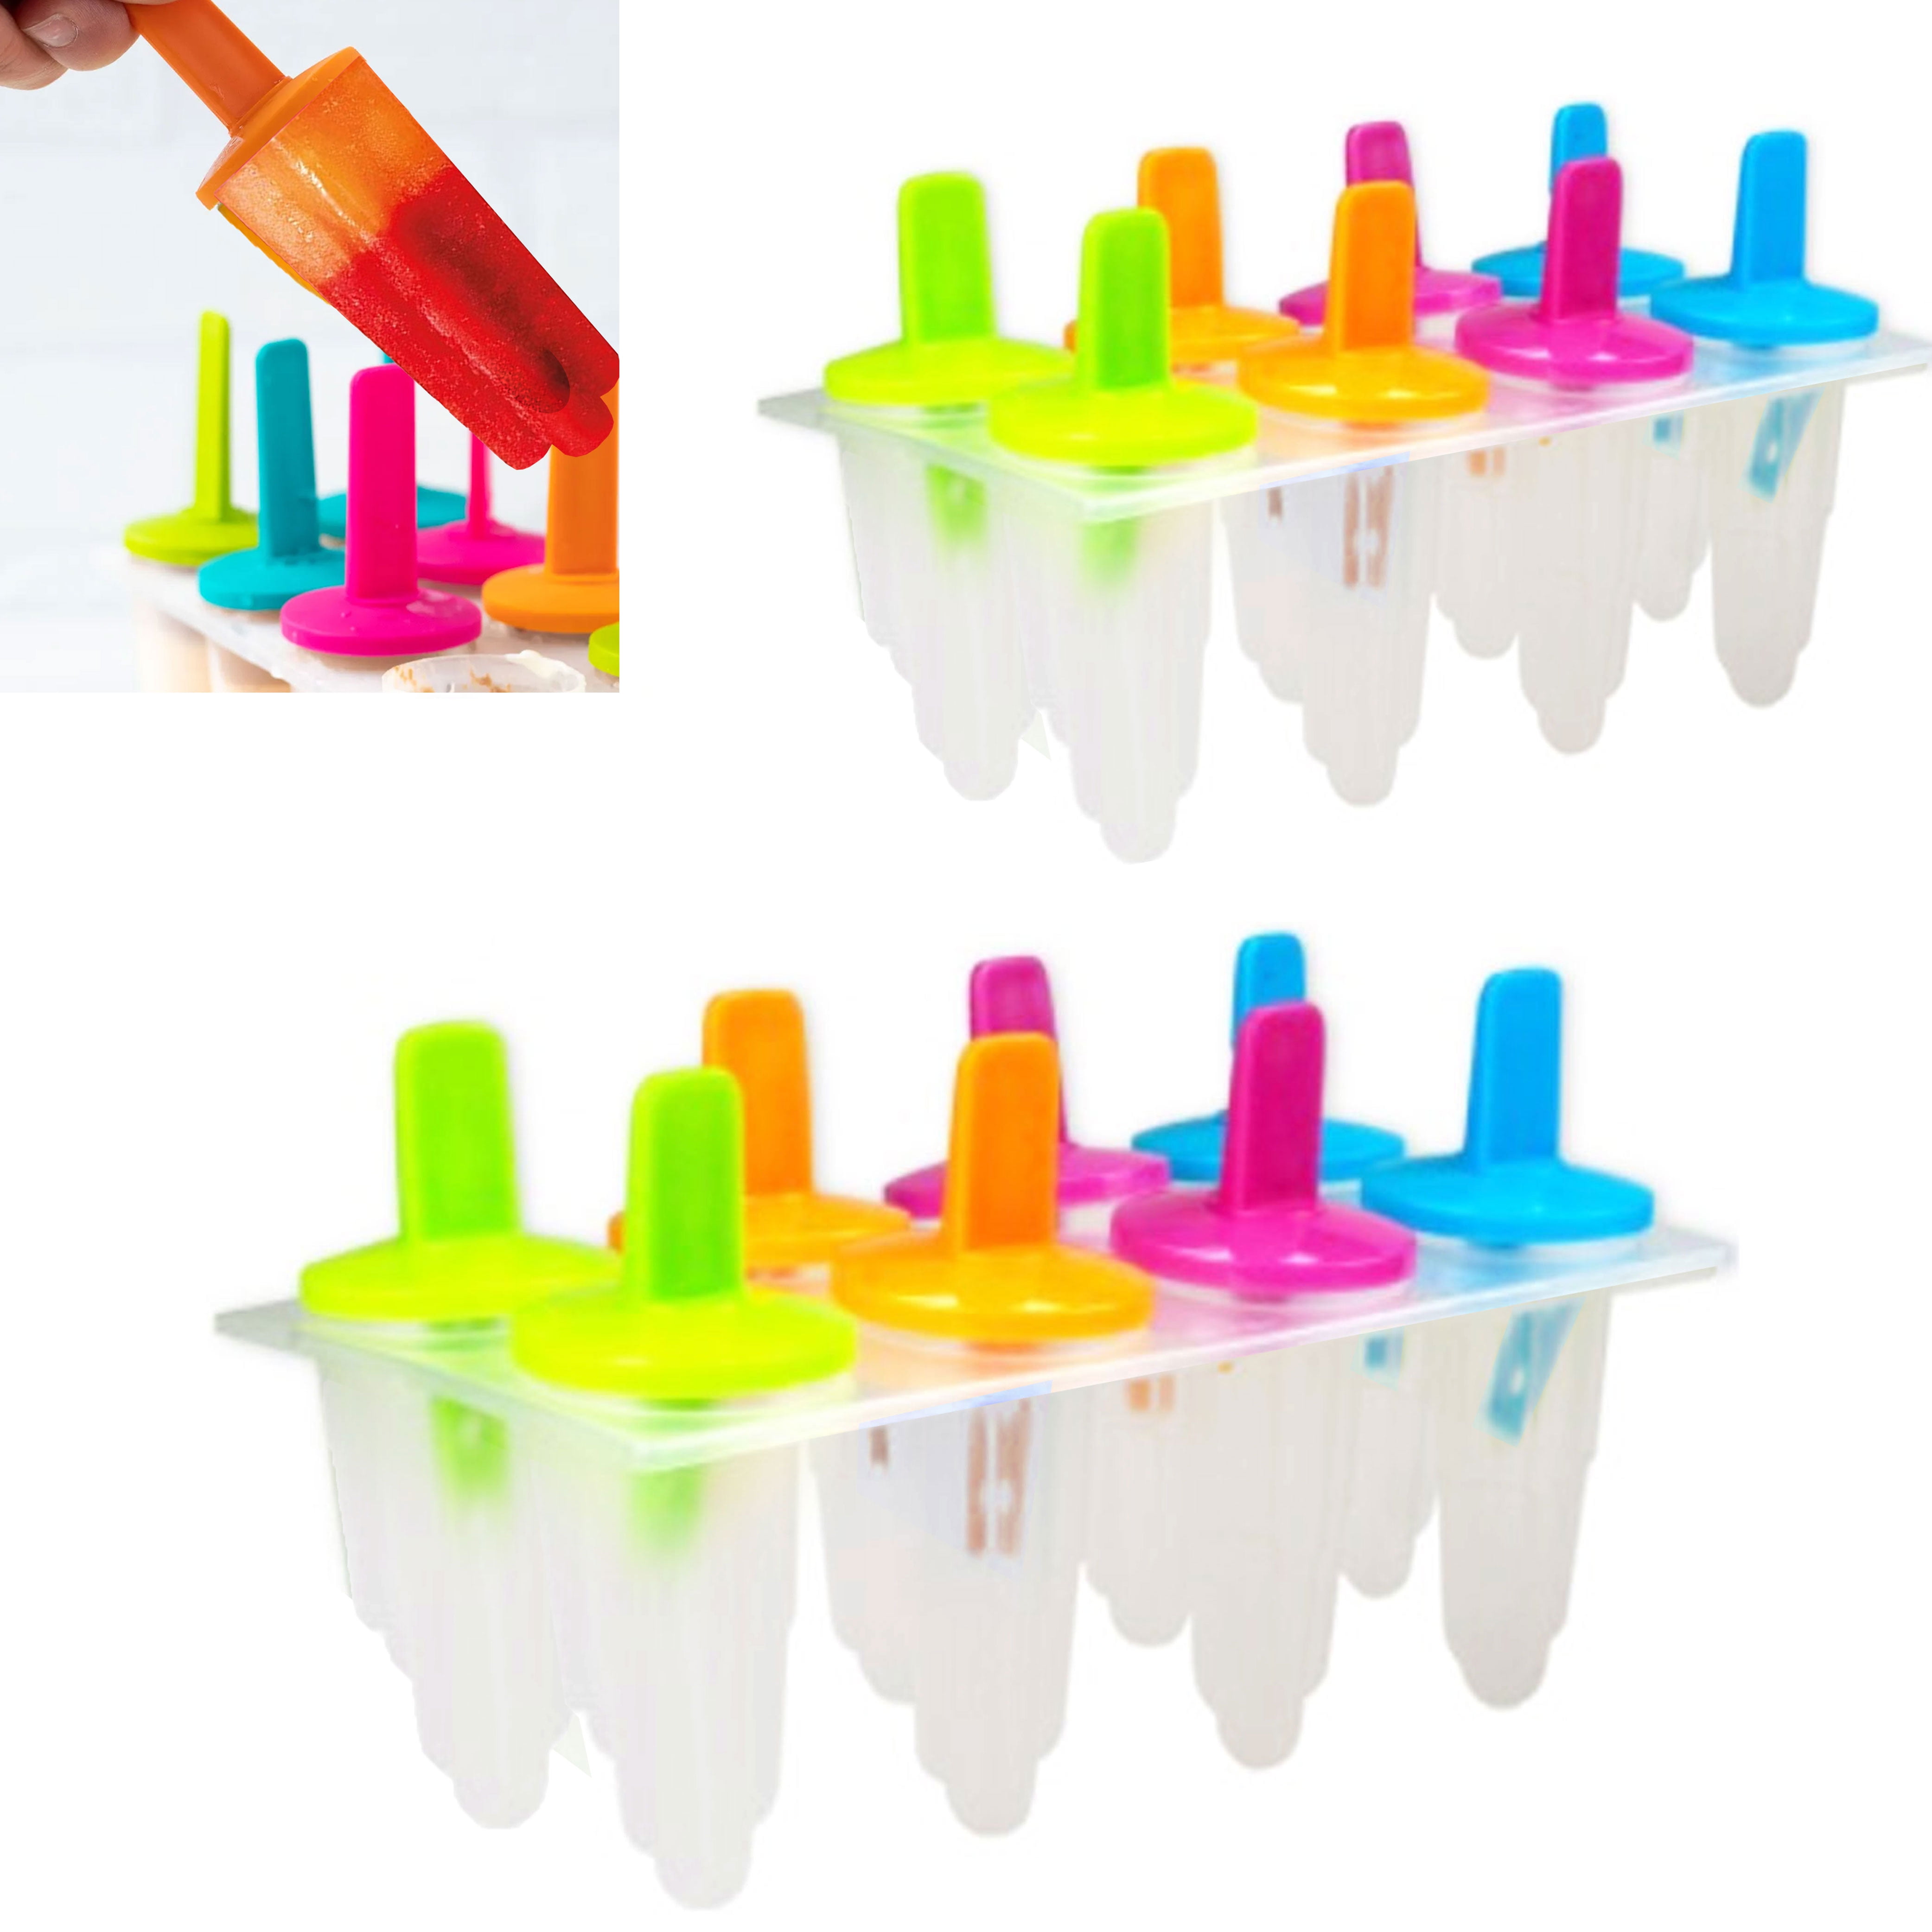 Details about   8 Grids Ice Juice Lolly Popsicle Maker Mold Popsicle Icebox W6U1 